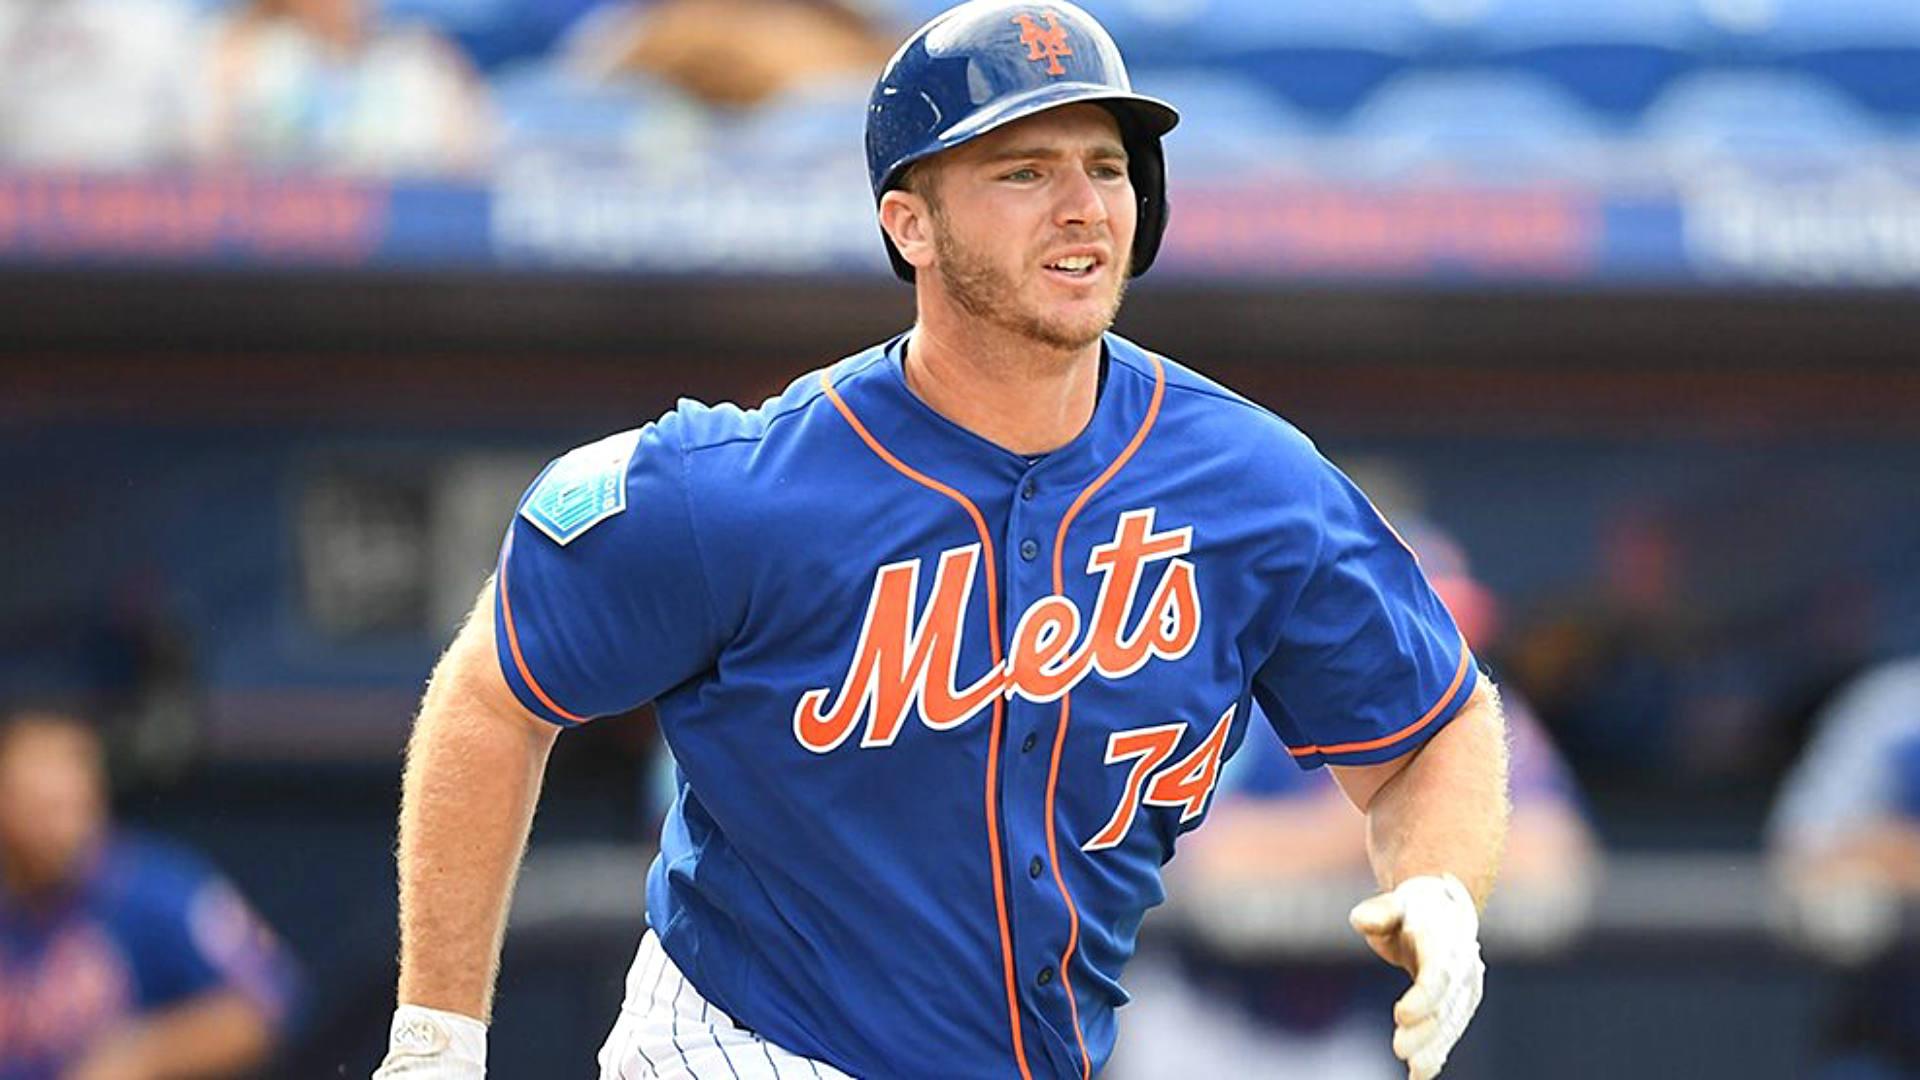 Mets prospect Peter Alonso: Gladiator mentality needed